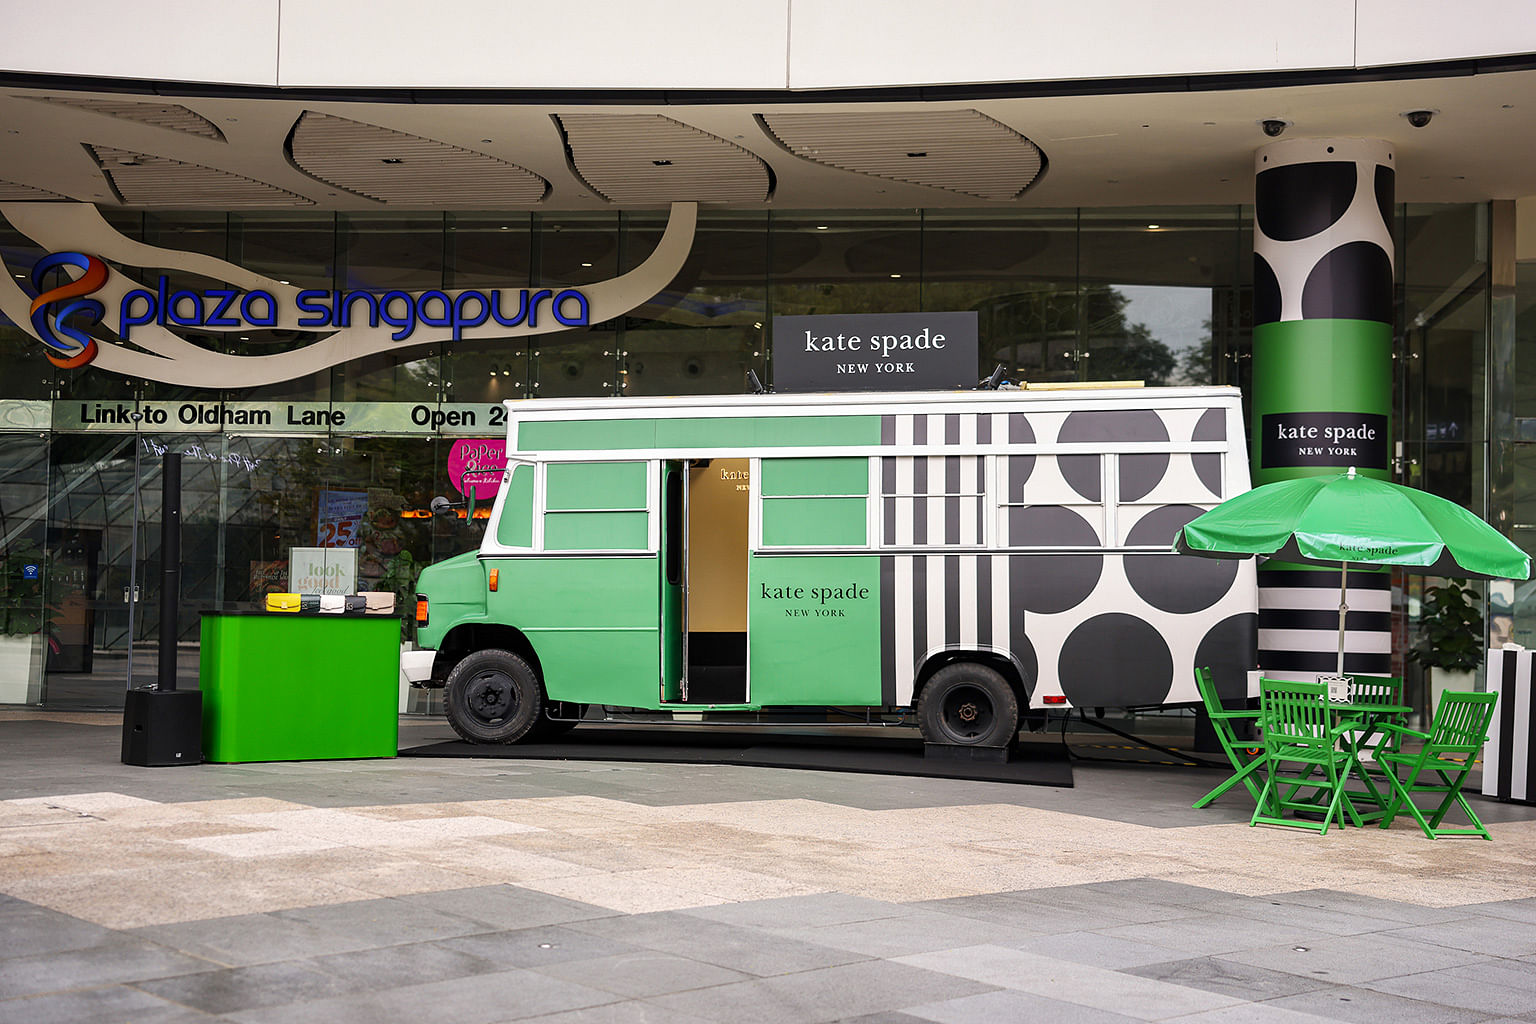 next stop: kate spade new york' Bus Pop-up - NYCPlugged